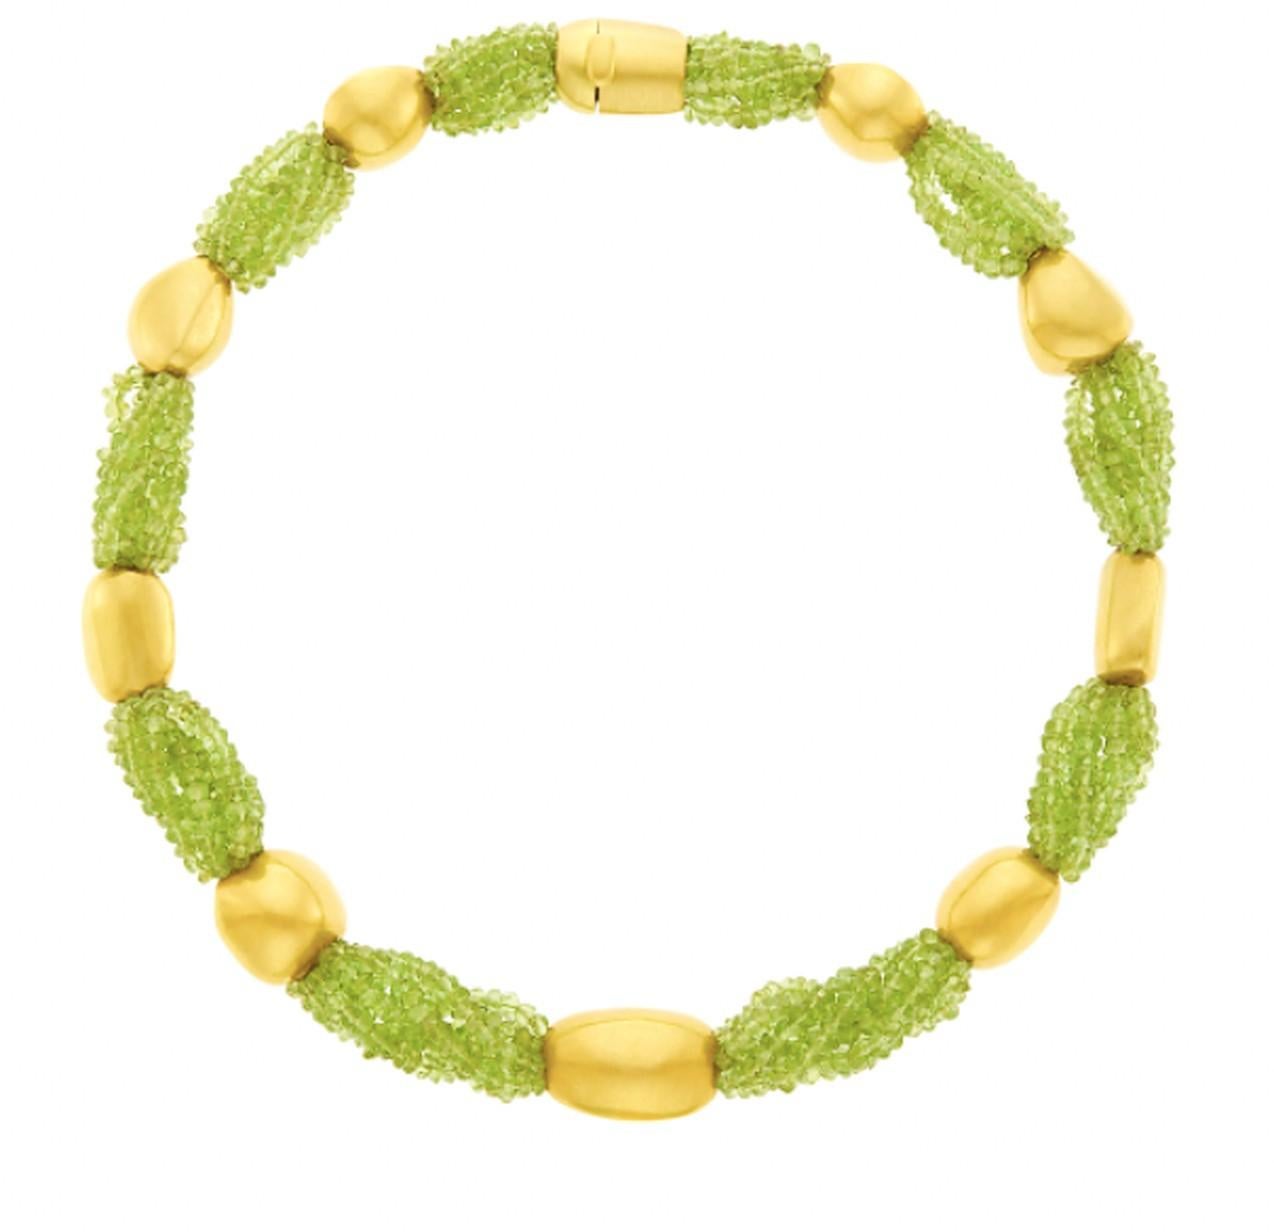 A Multi-Strand Peridot and Gold Bead Necklace by Sabbadini. Made in Italy, circa 1980.